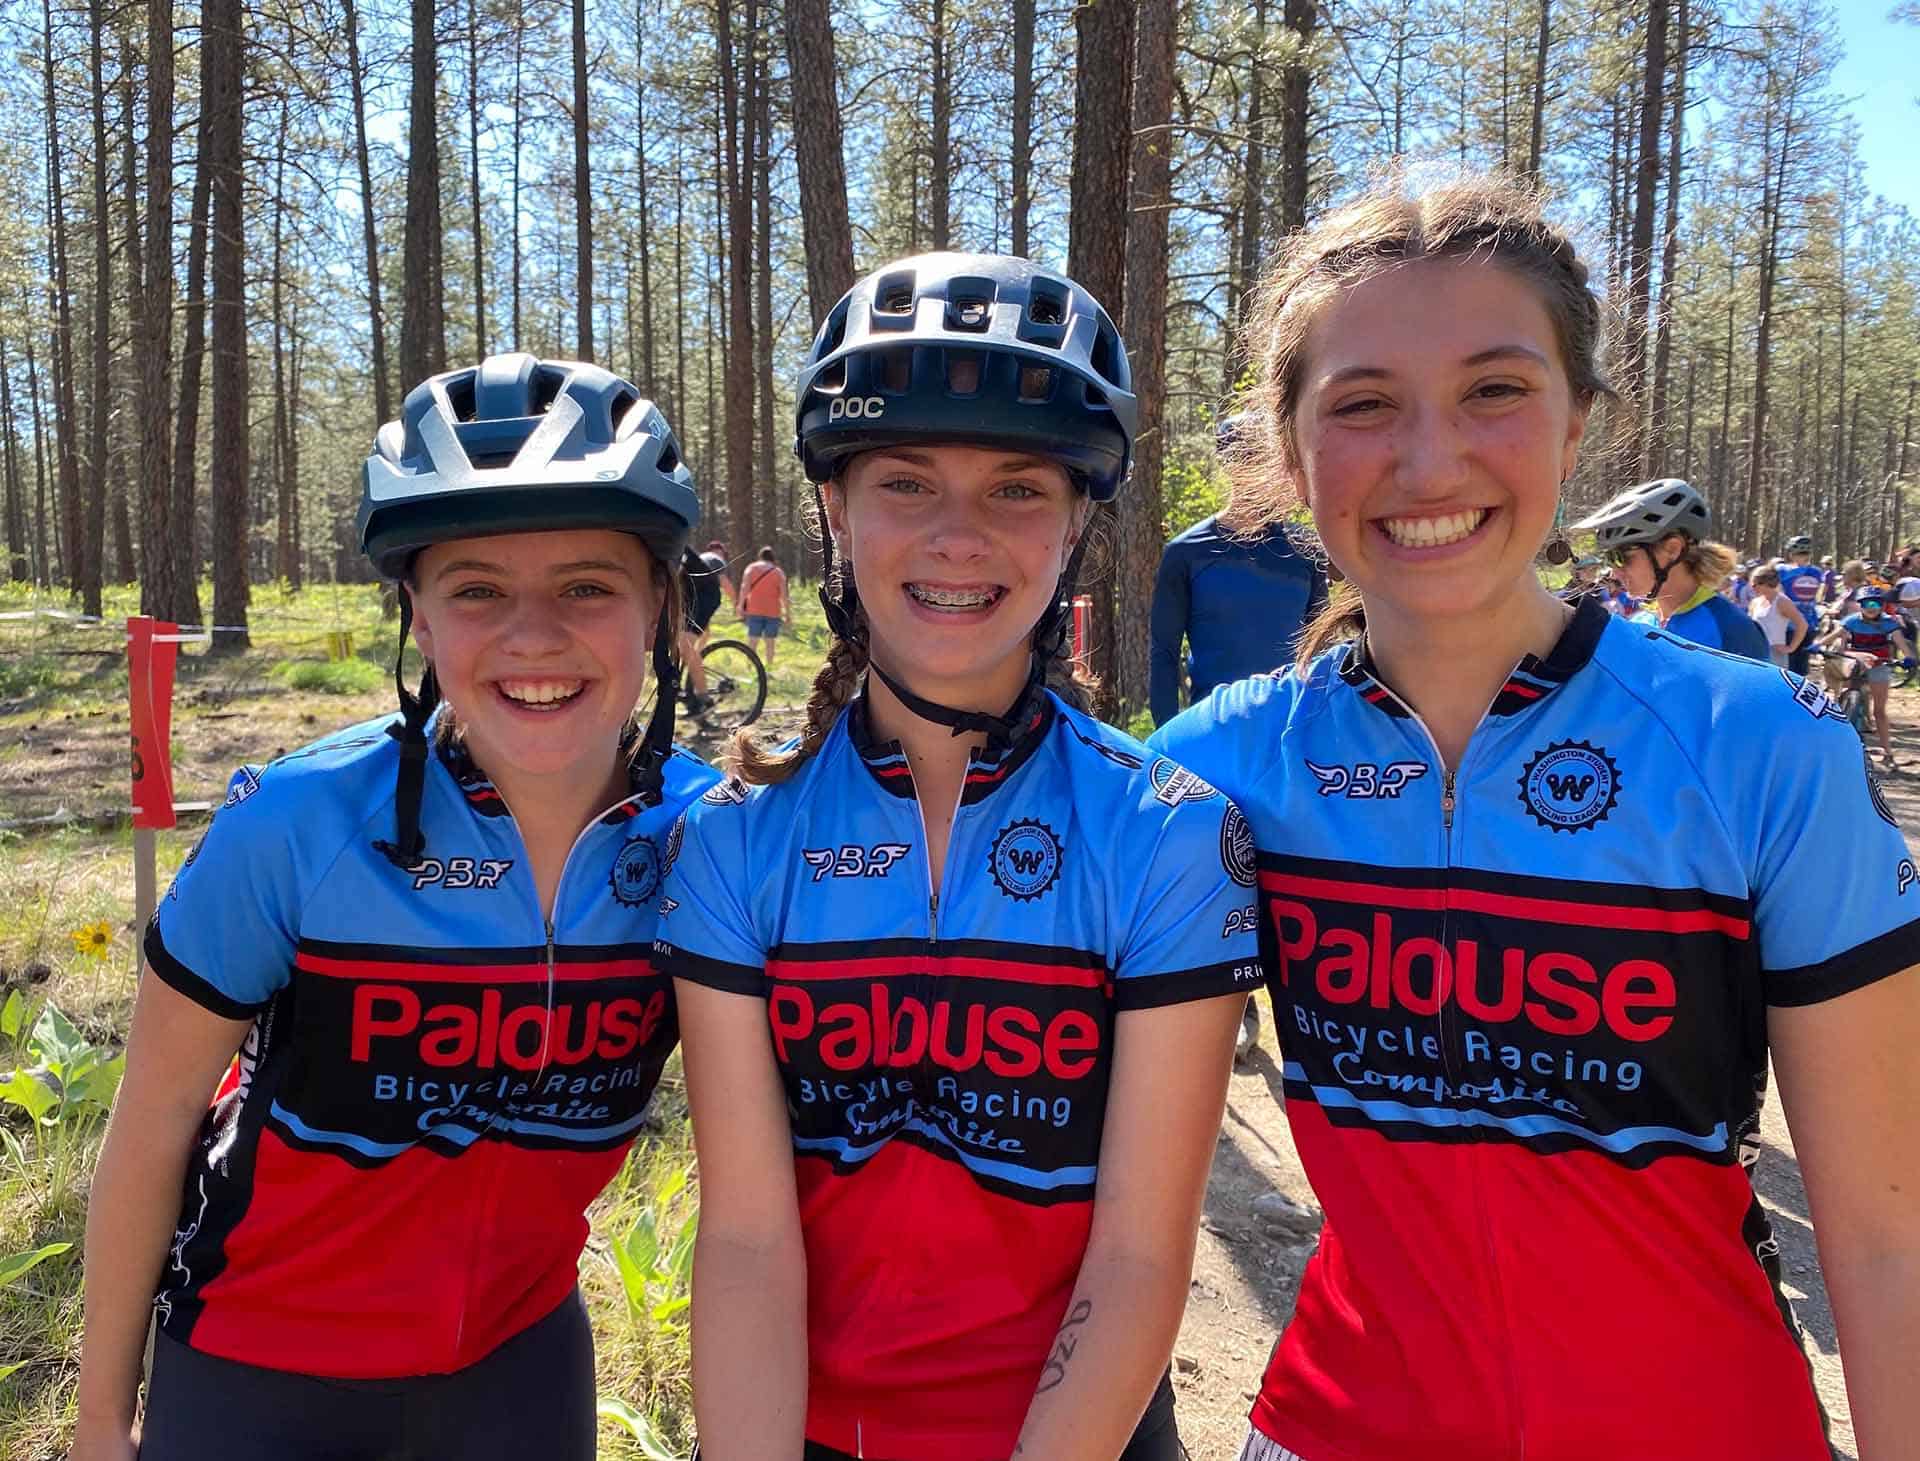 Three bicycle racers from the Palouse Bicycle Racing team smiling with forest race happening in the background